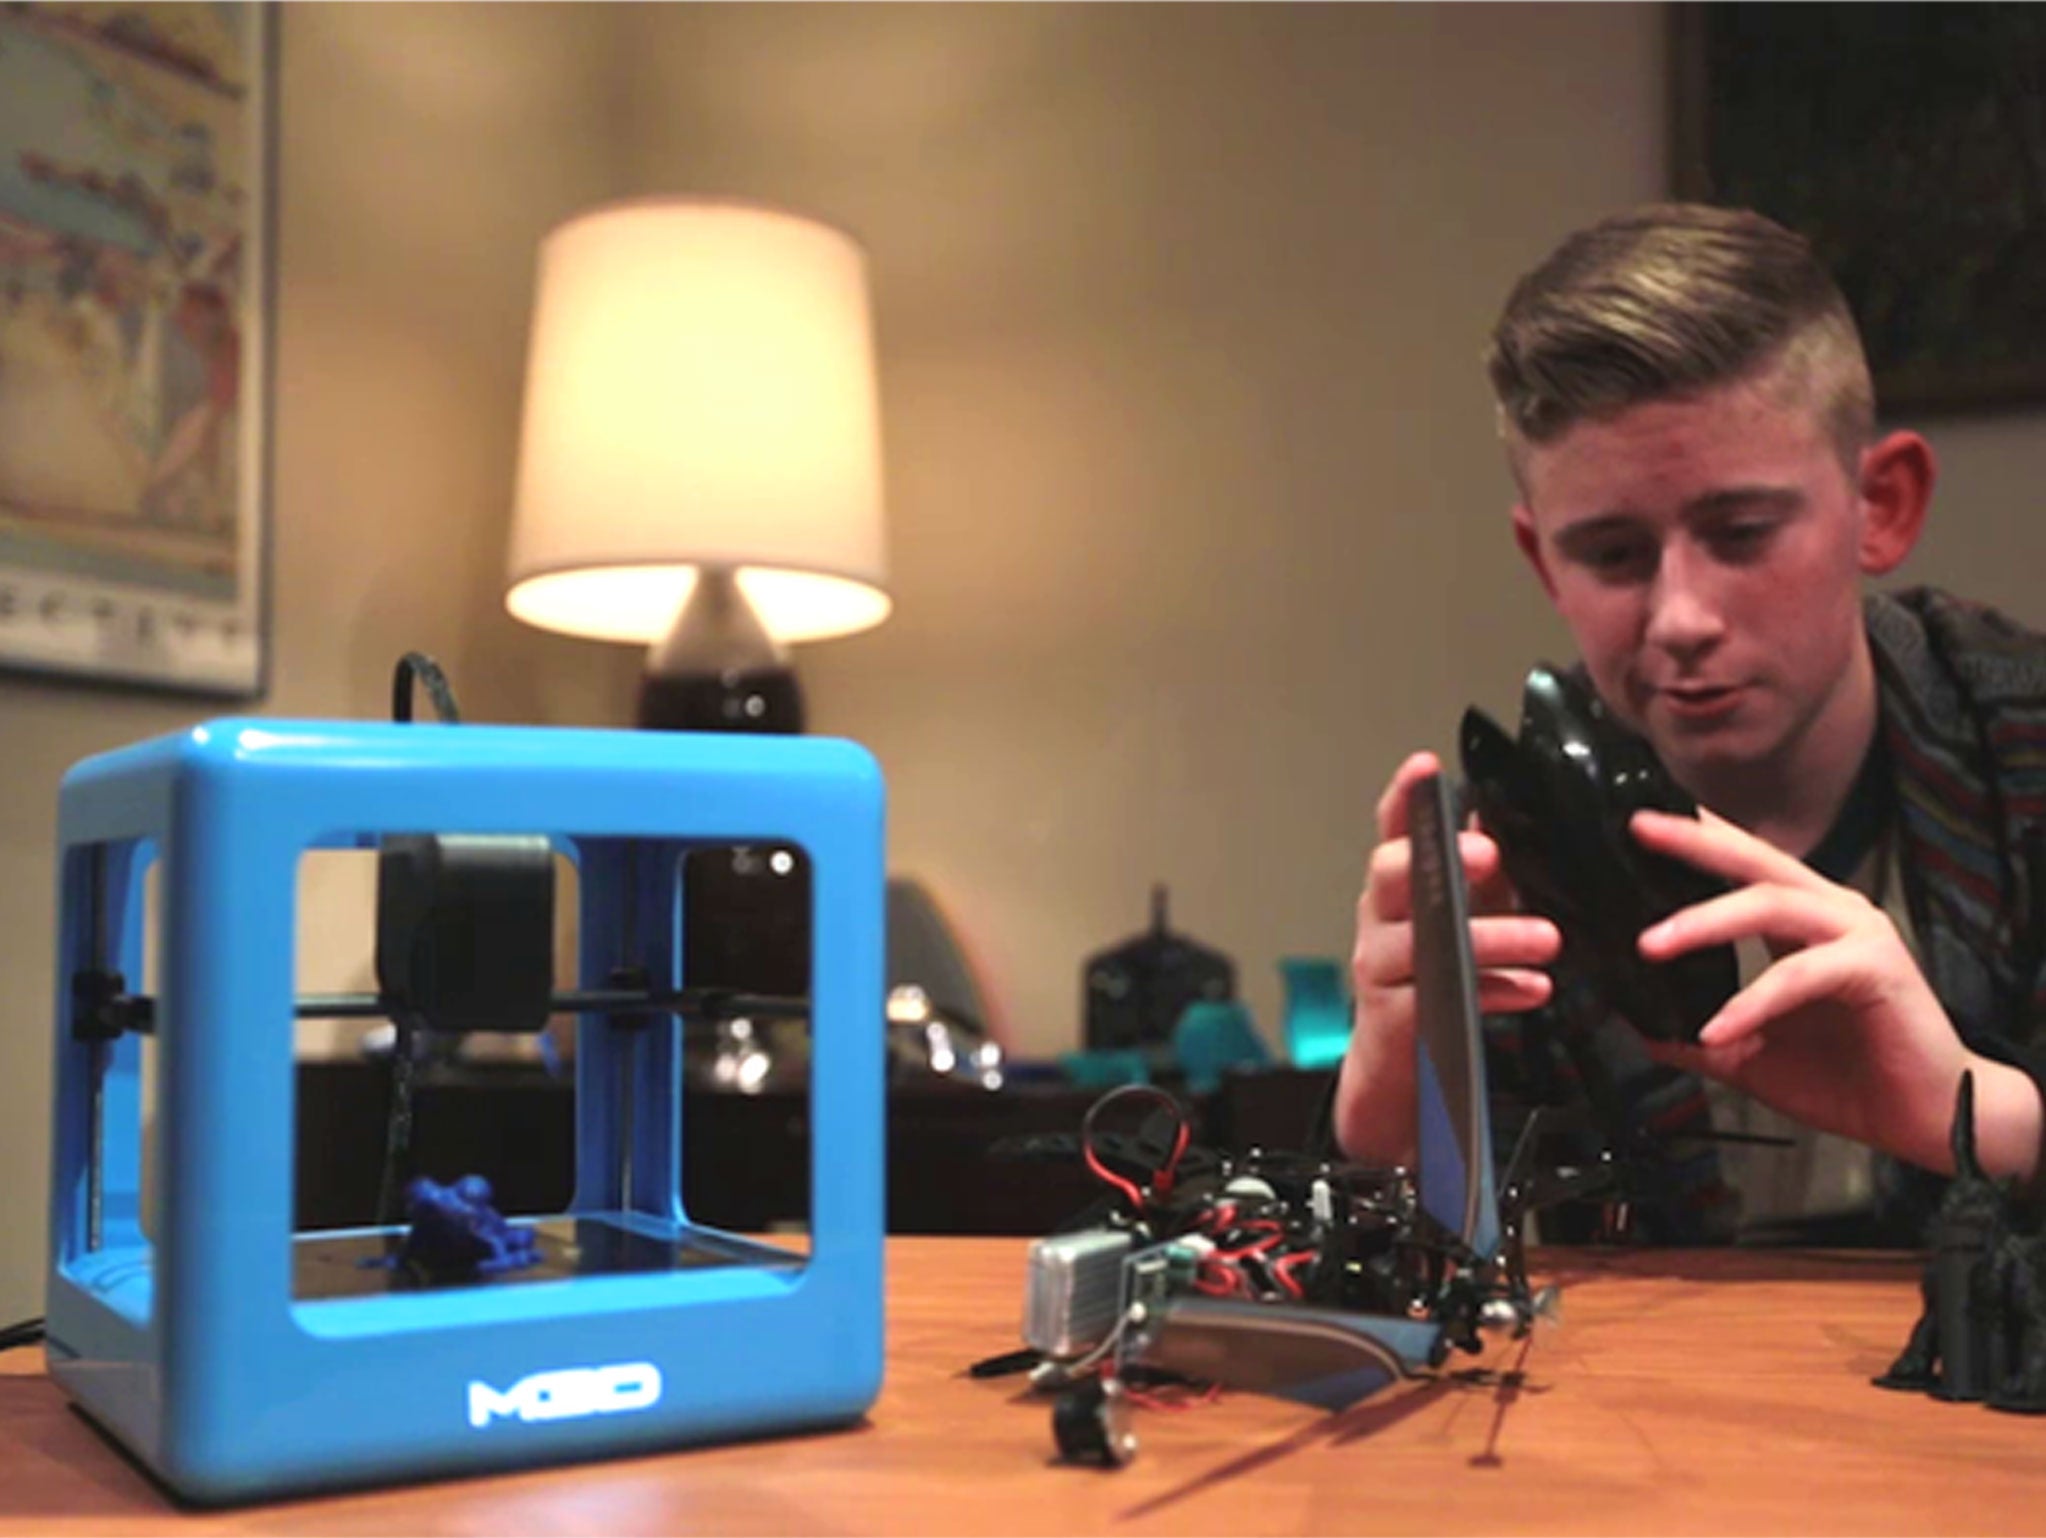 The Micro 3D printer claim that the device will be the first easy-to-use 3D printer that will let users 'just plug it in and hit print'